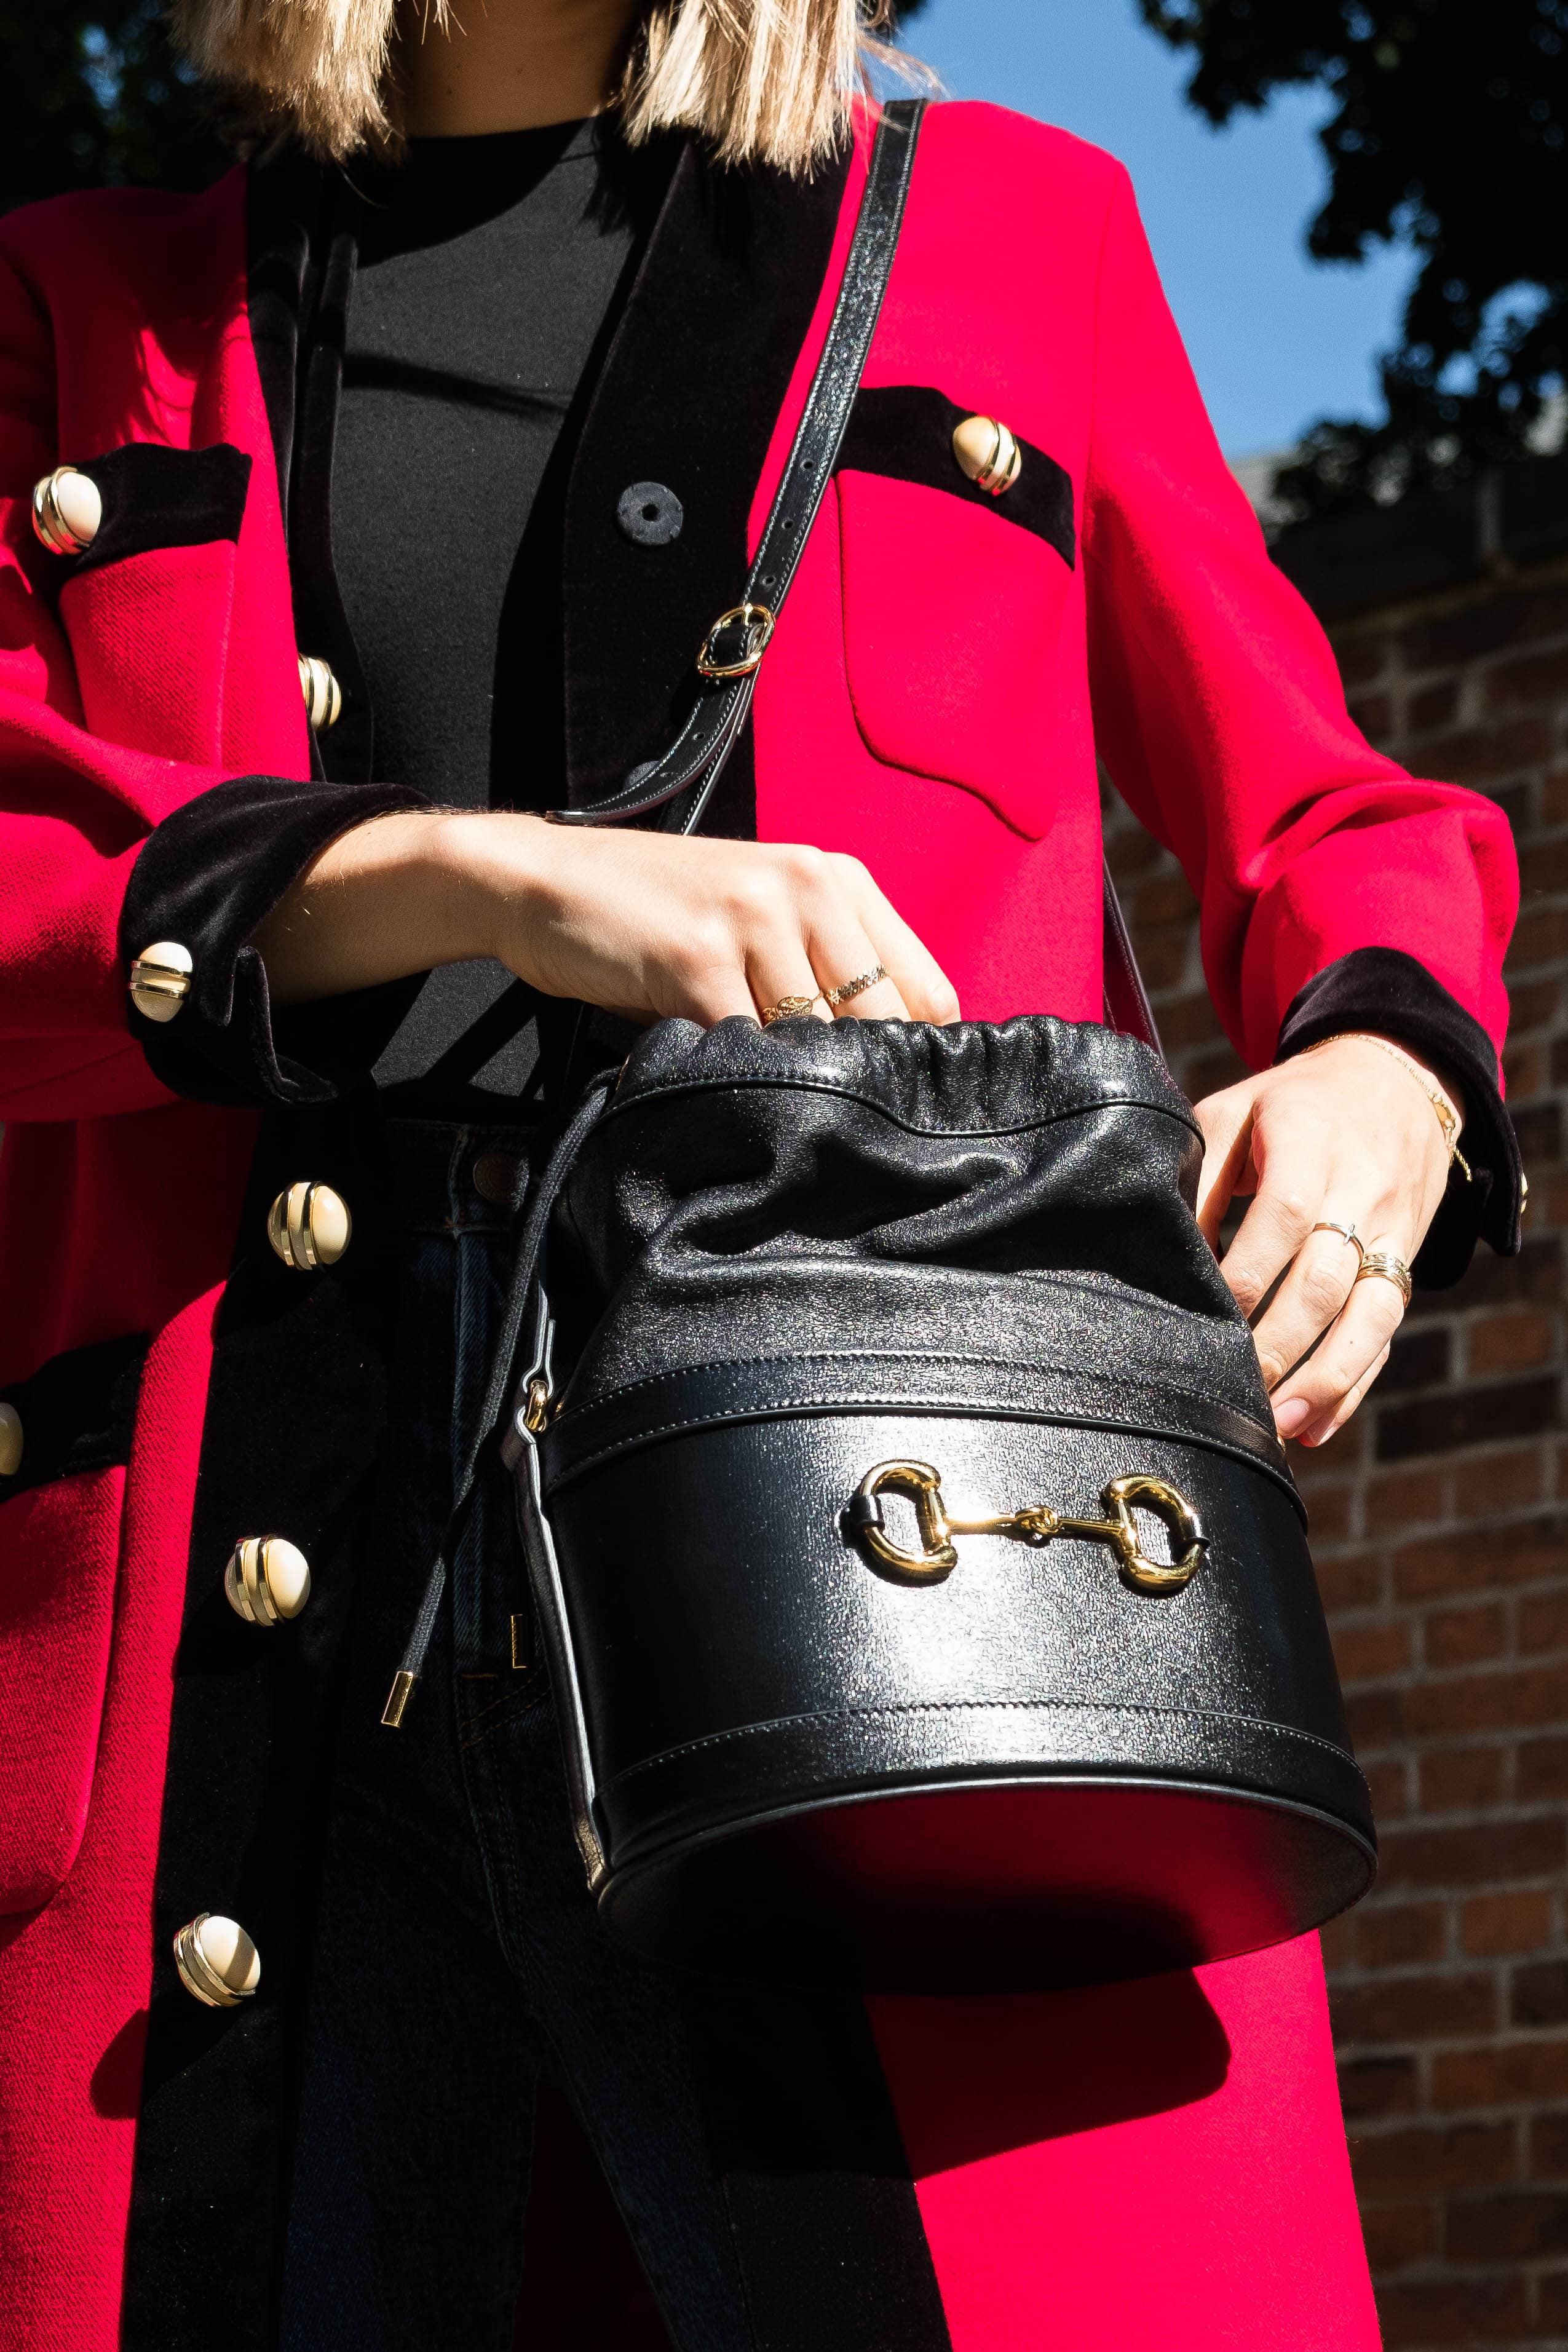 Browse a gallery of street-style looks paired with the Gucci 1955 Horsebit  bag.